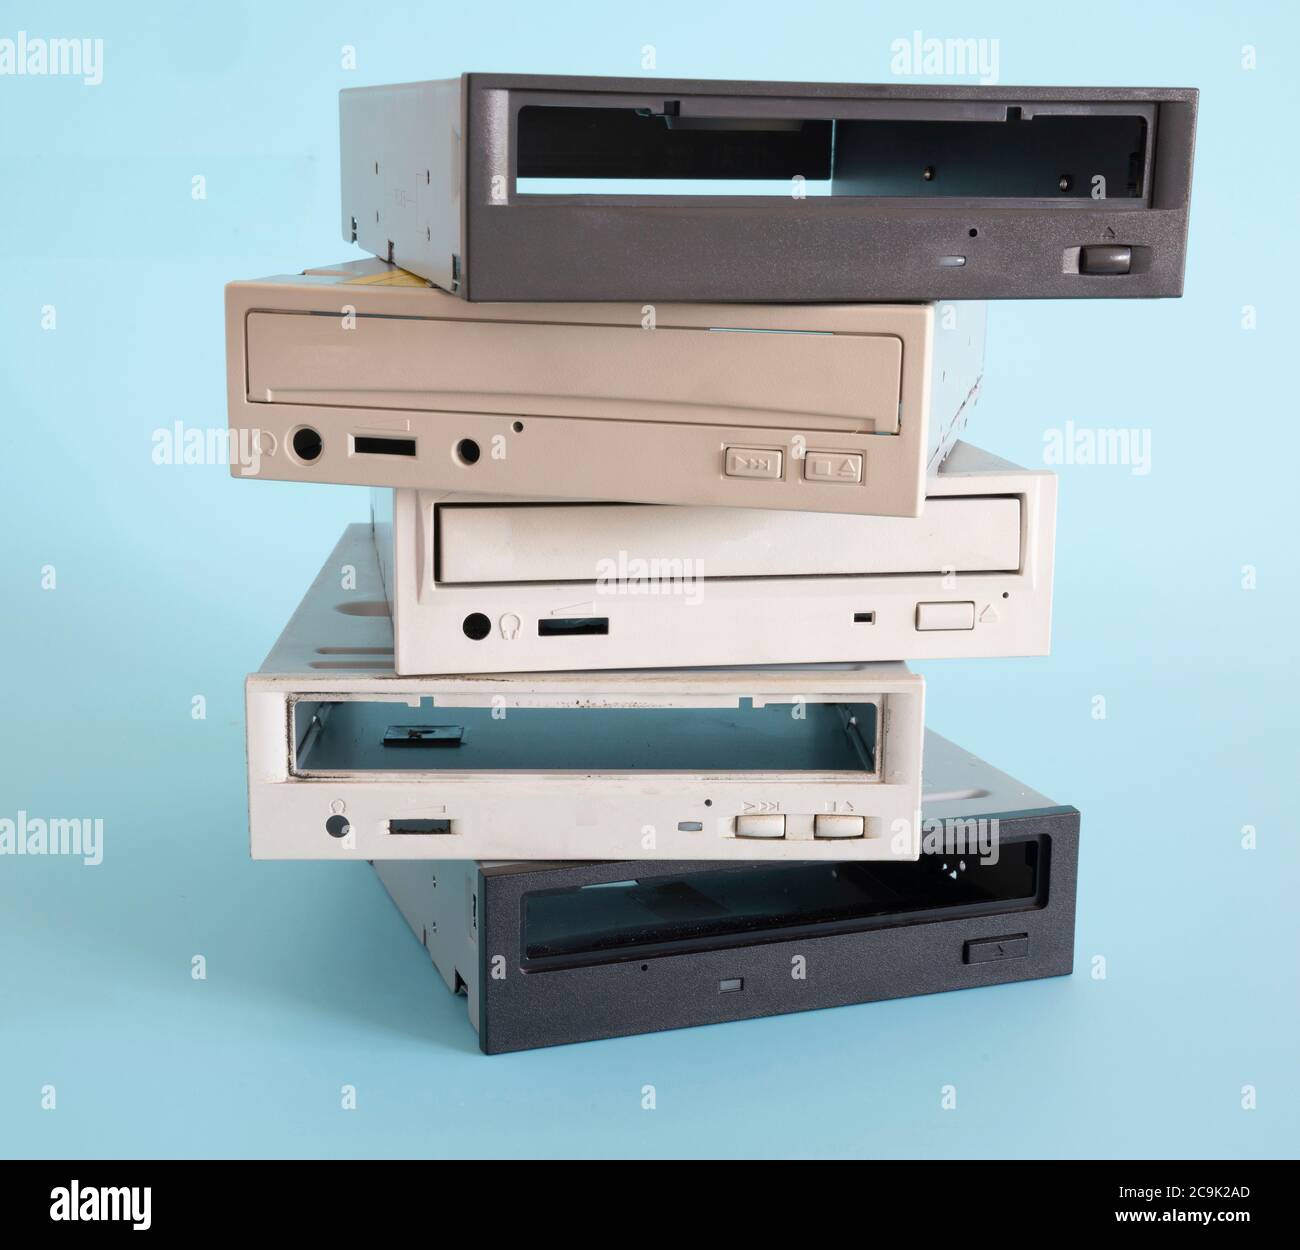 Computer hardware for recycling. Stock Photo